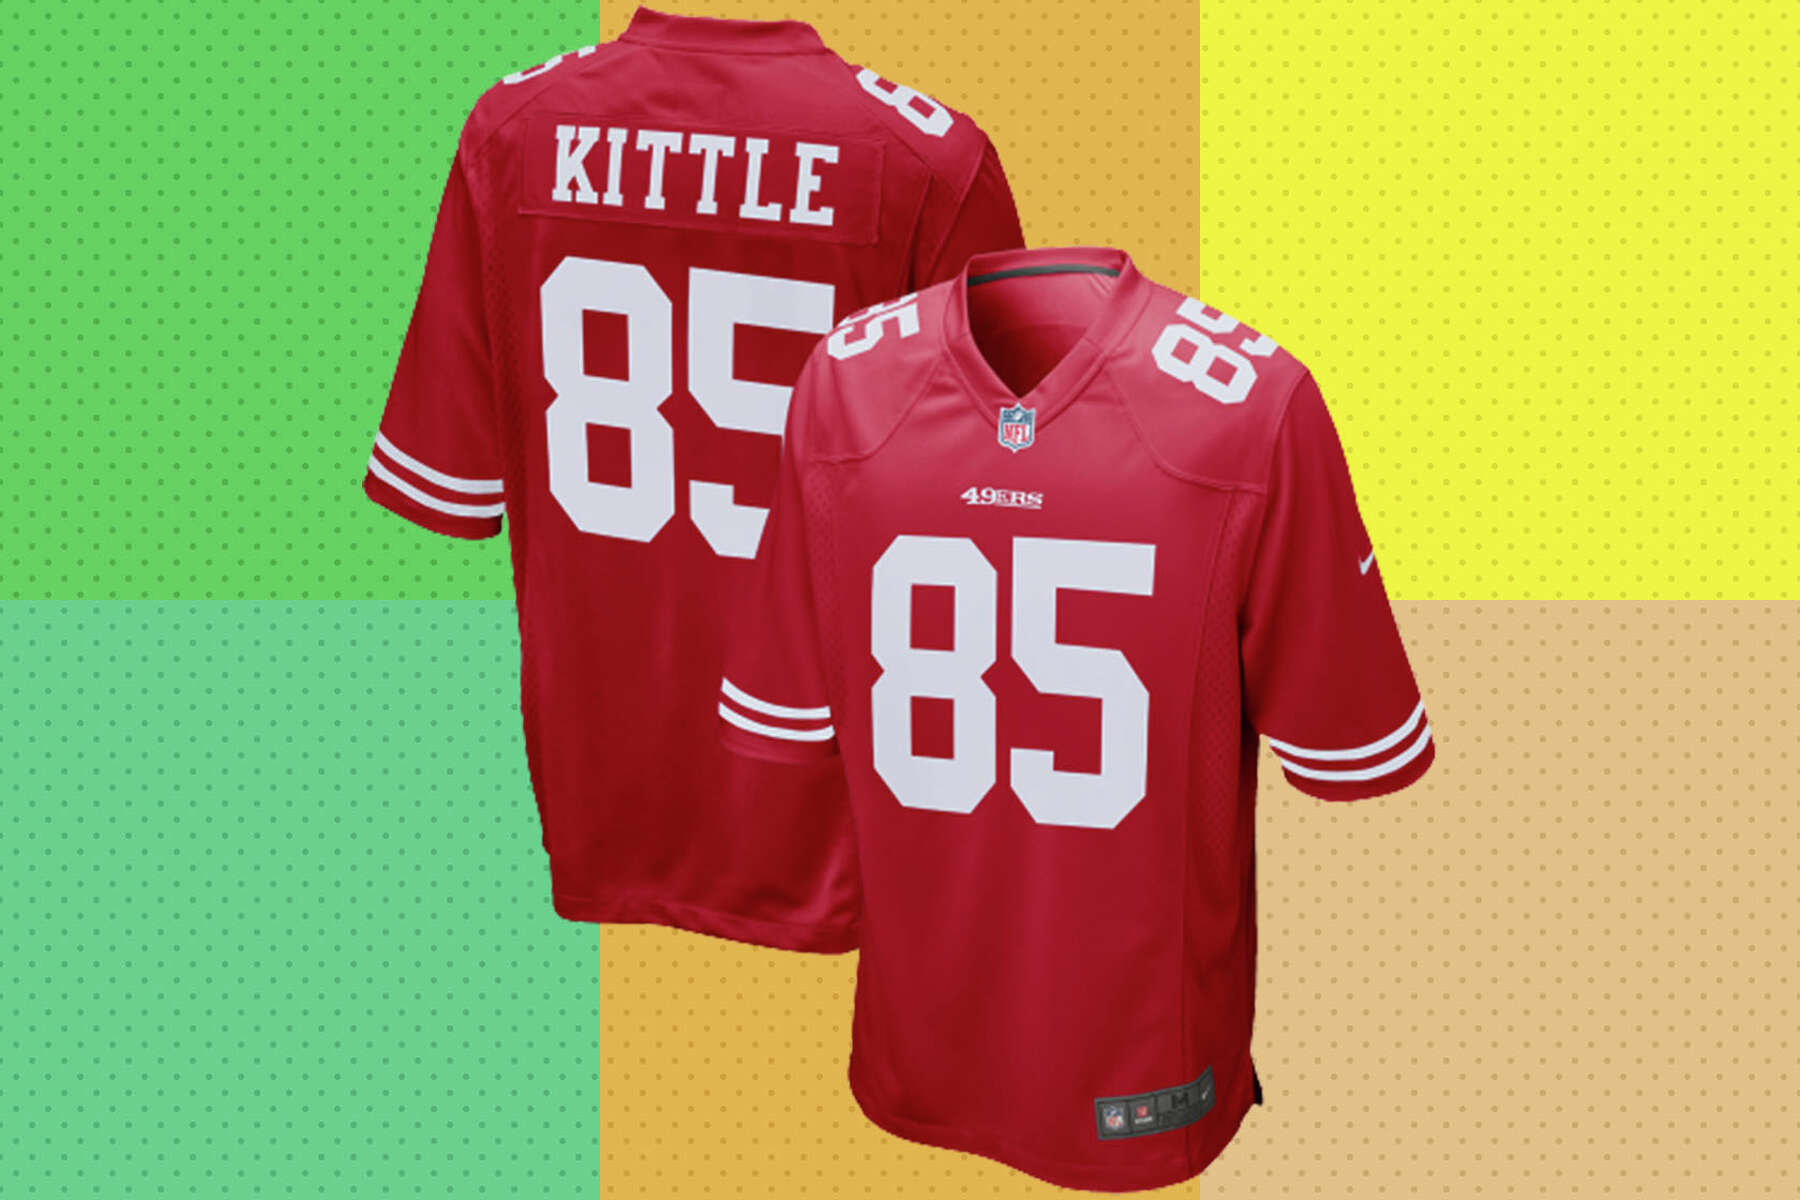 49ers gear: Get a George Kittle jersey for under $100 today